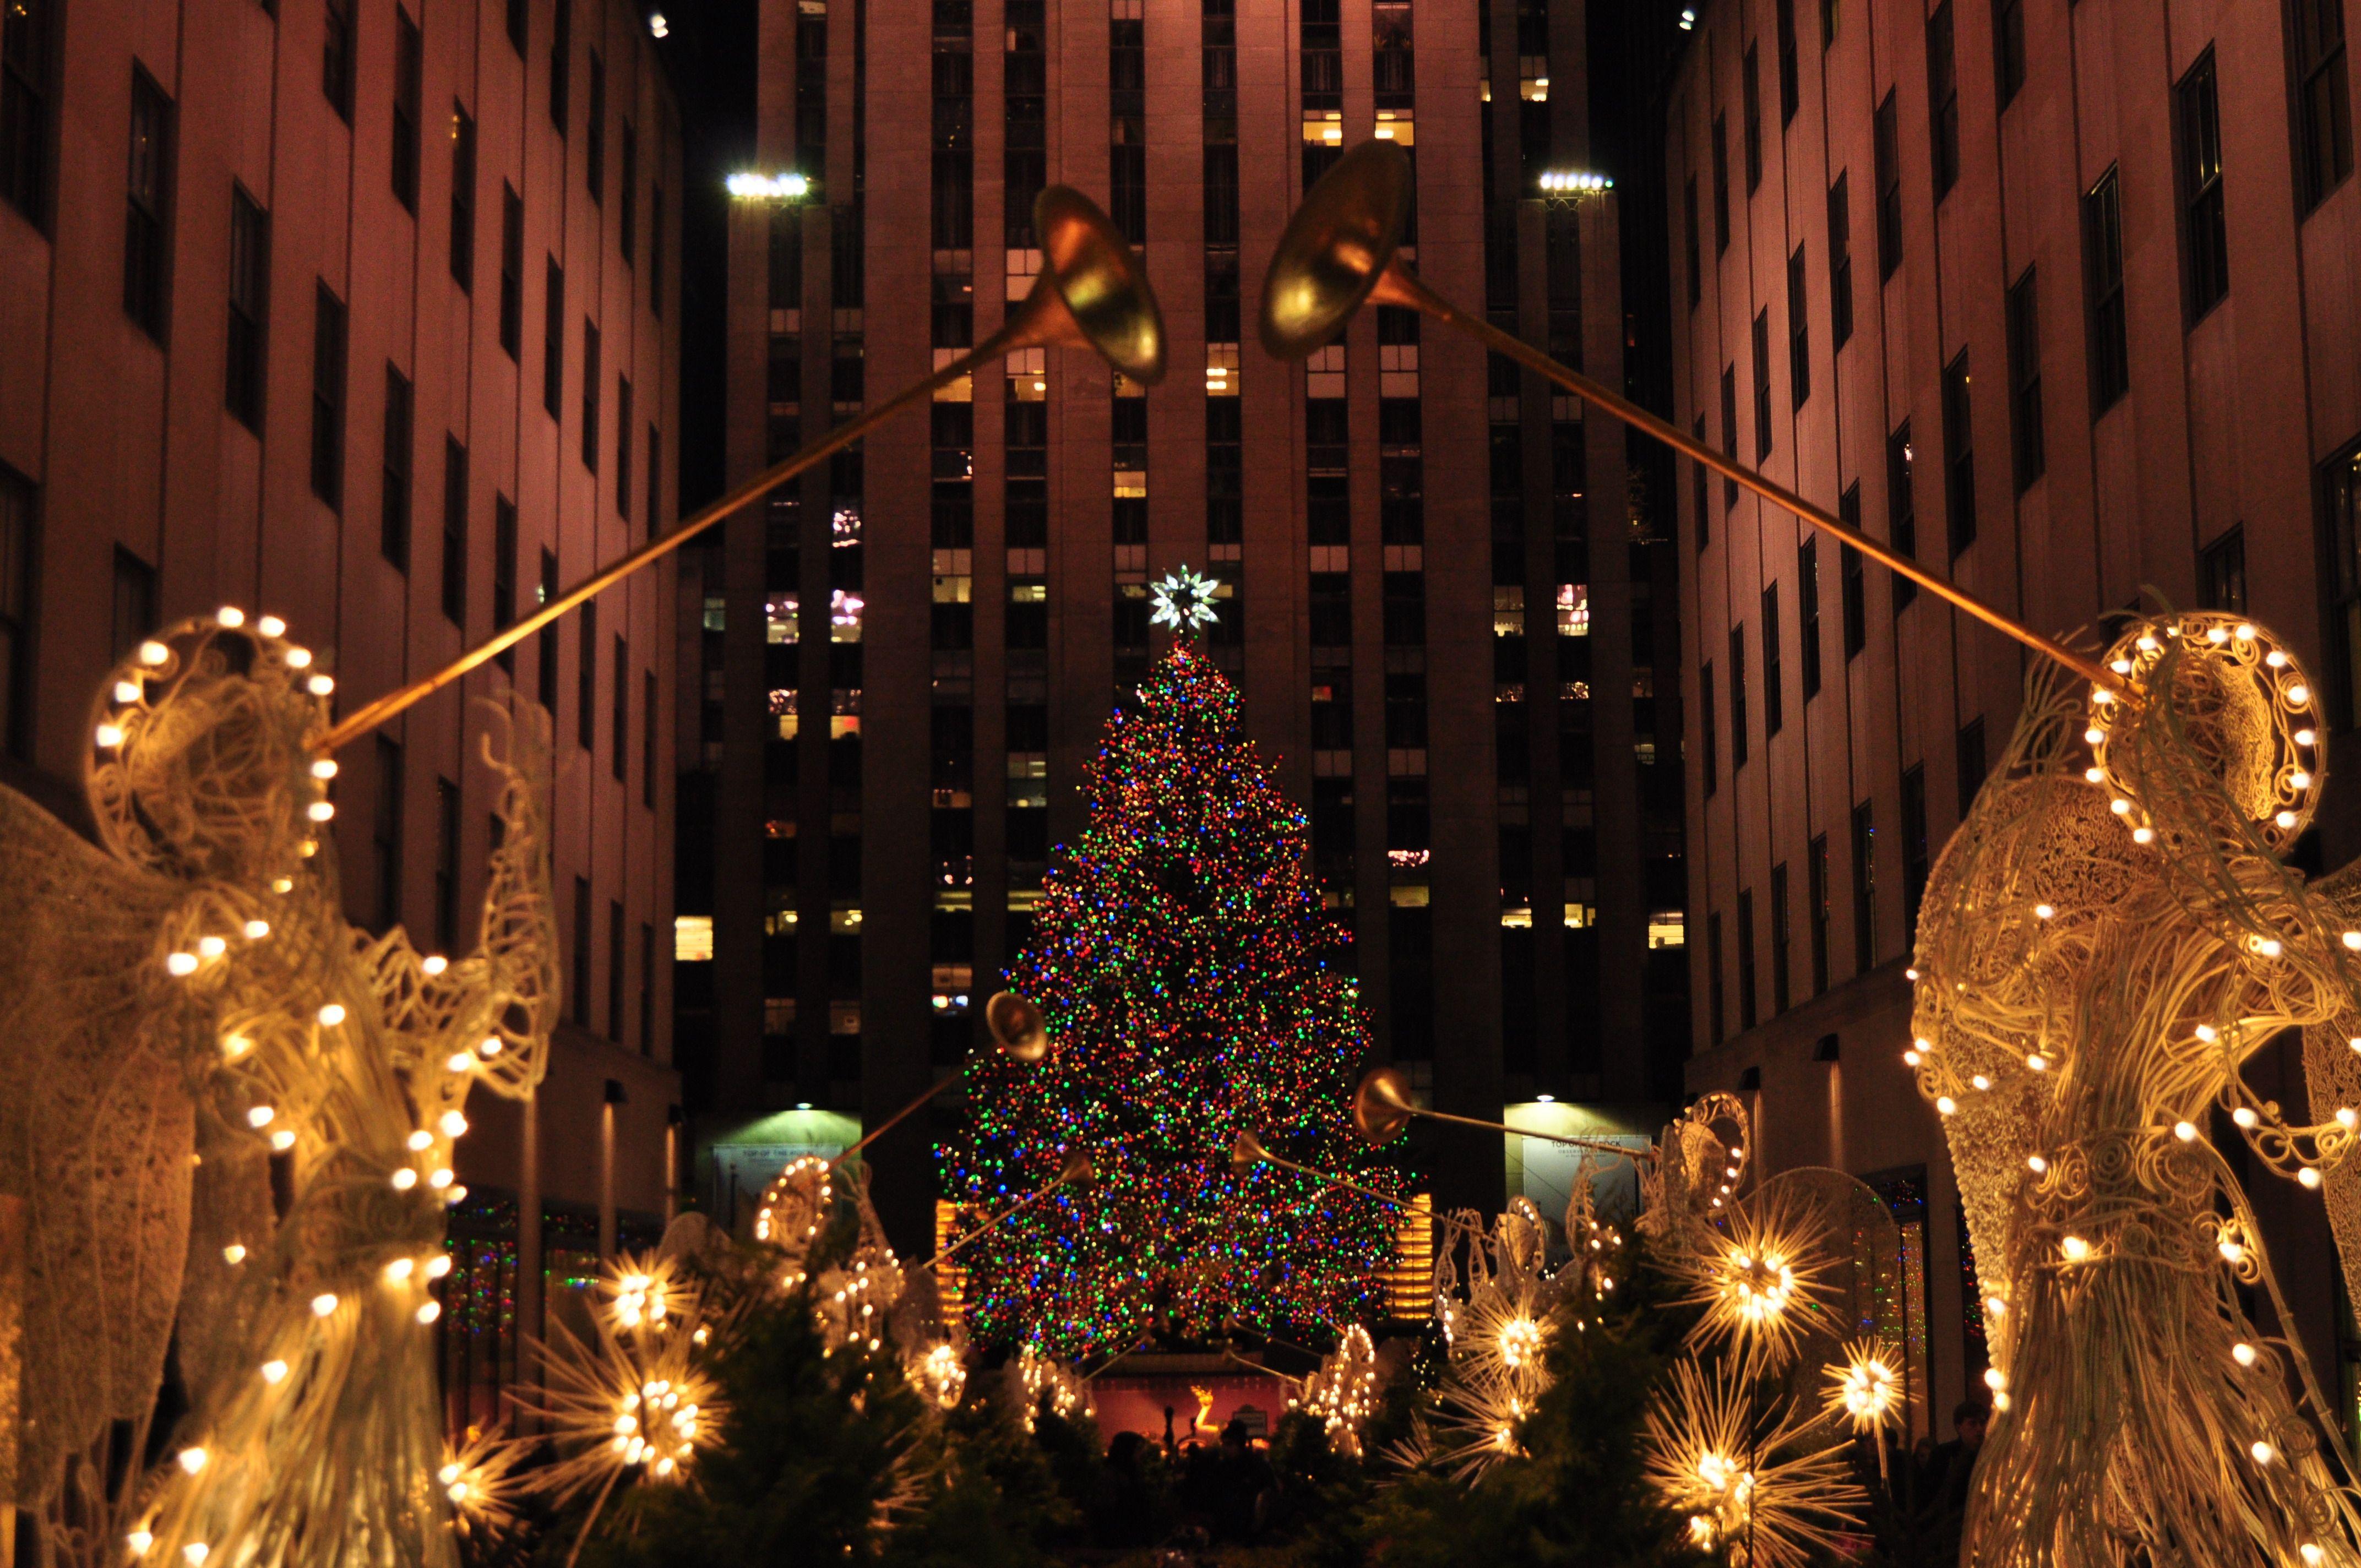 New York Christmas Wallpaper 67 pictures